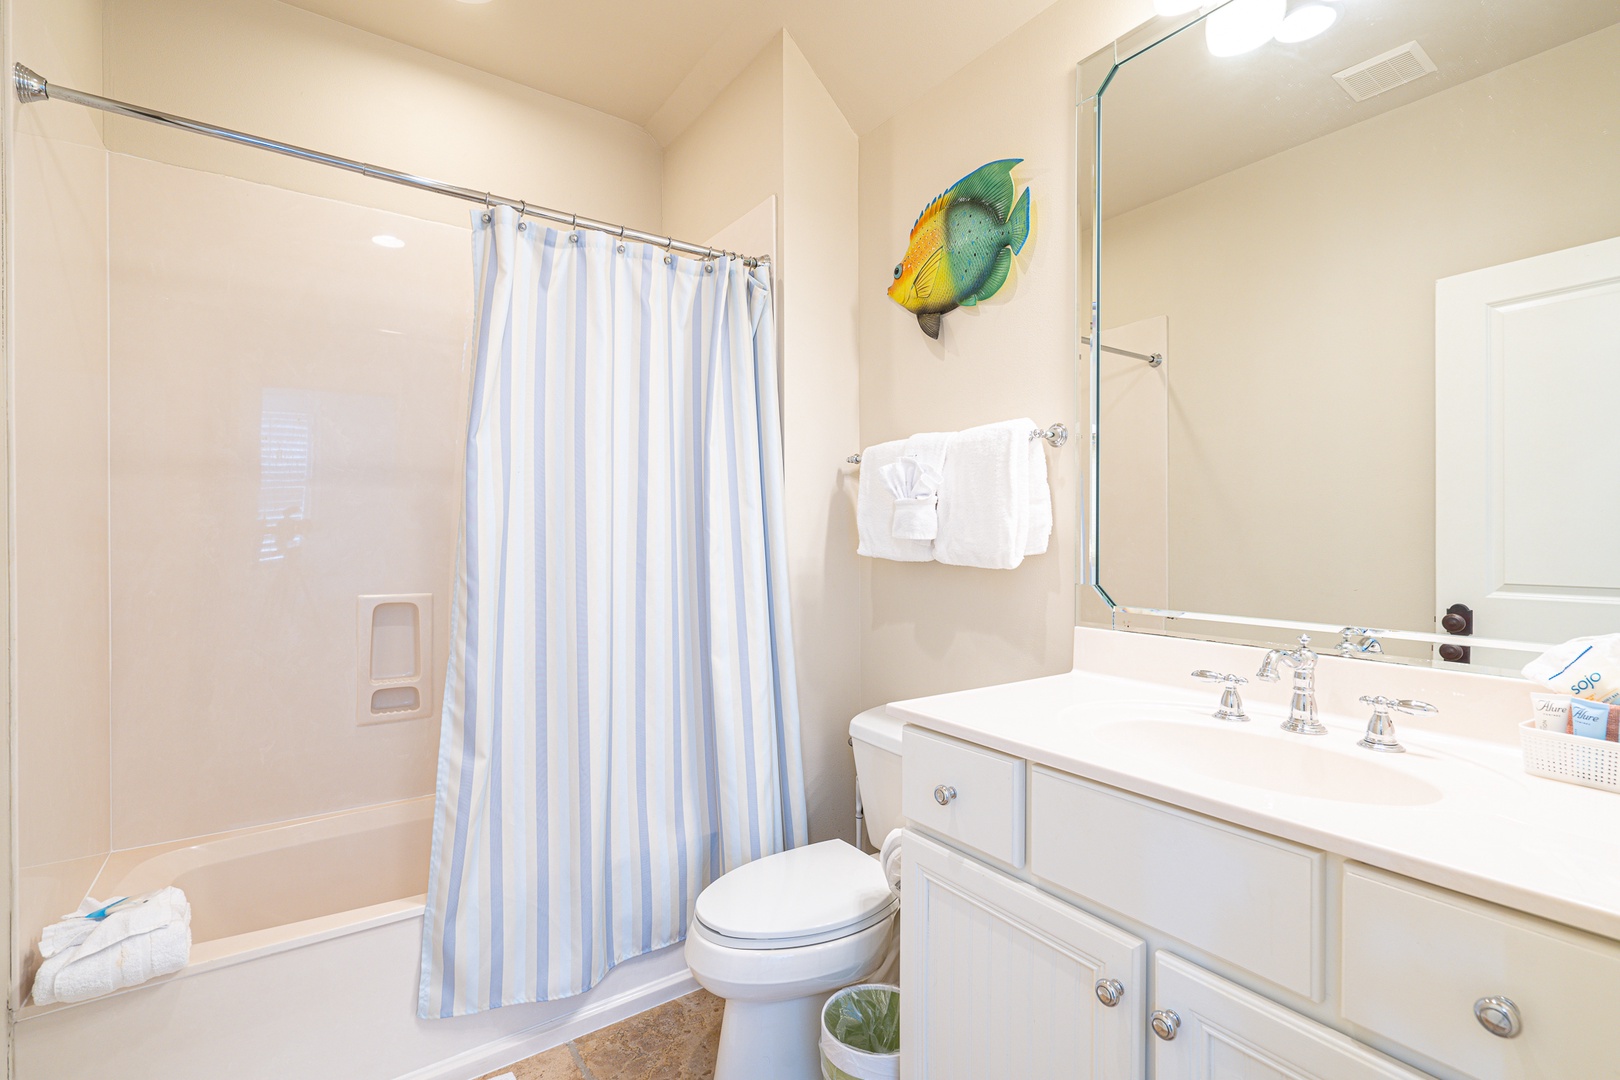 The king ensuite showcases a double vanity & glass shower